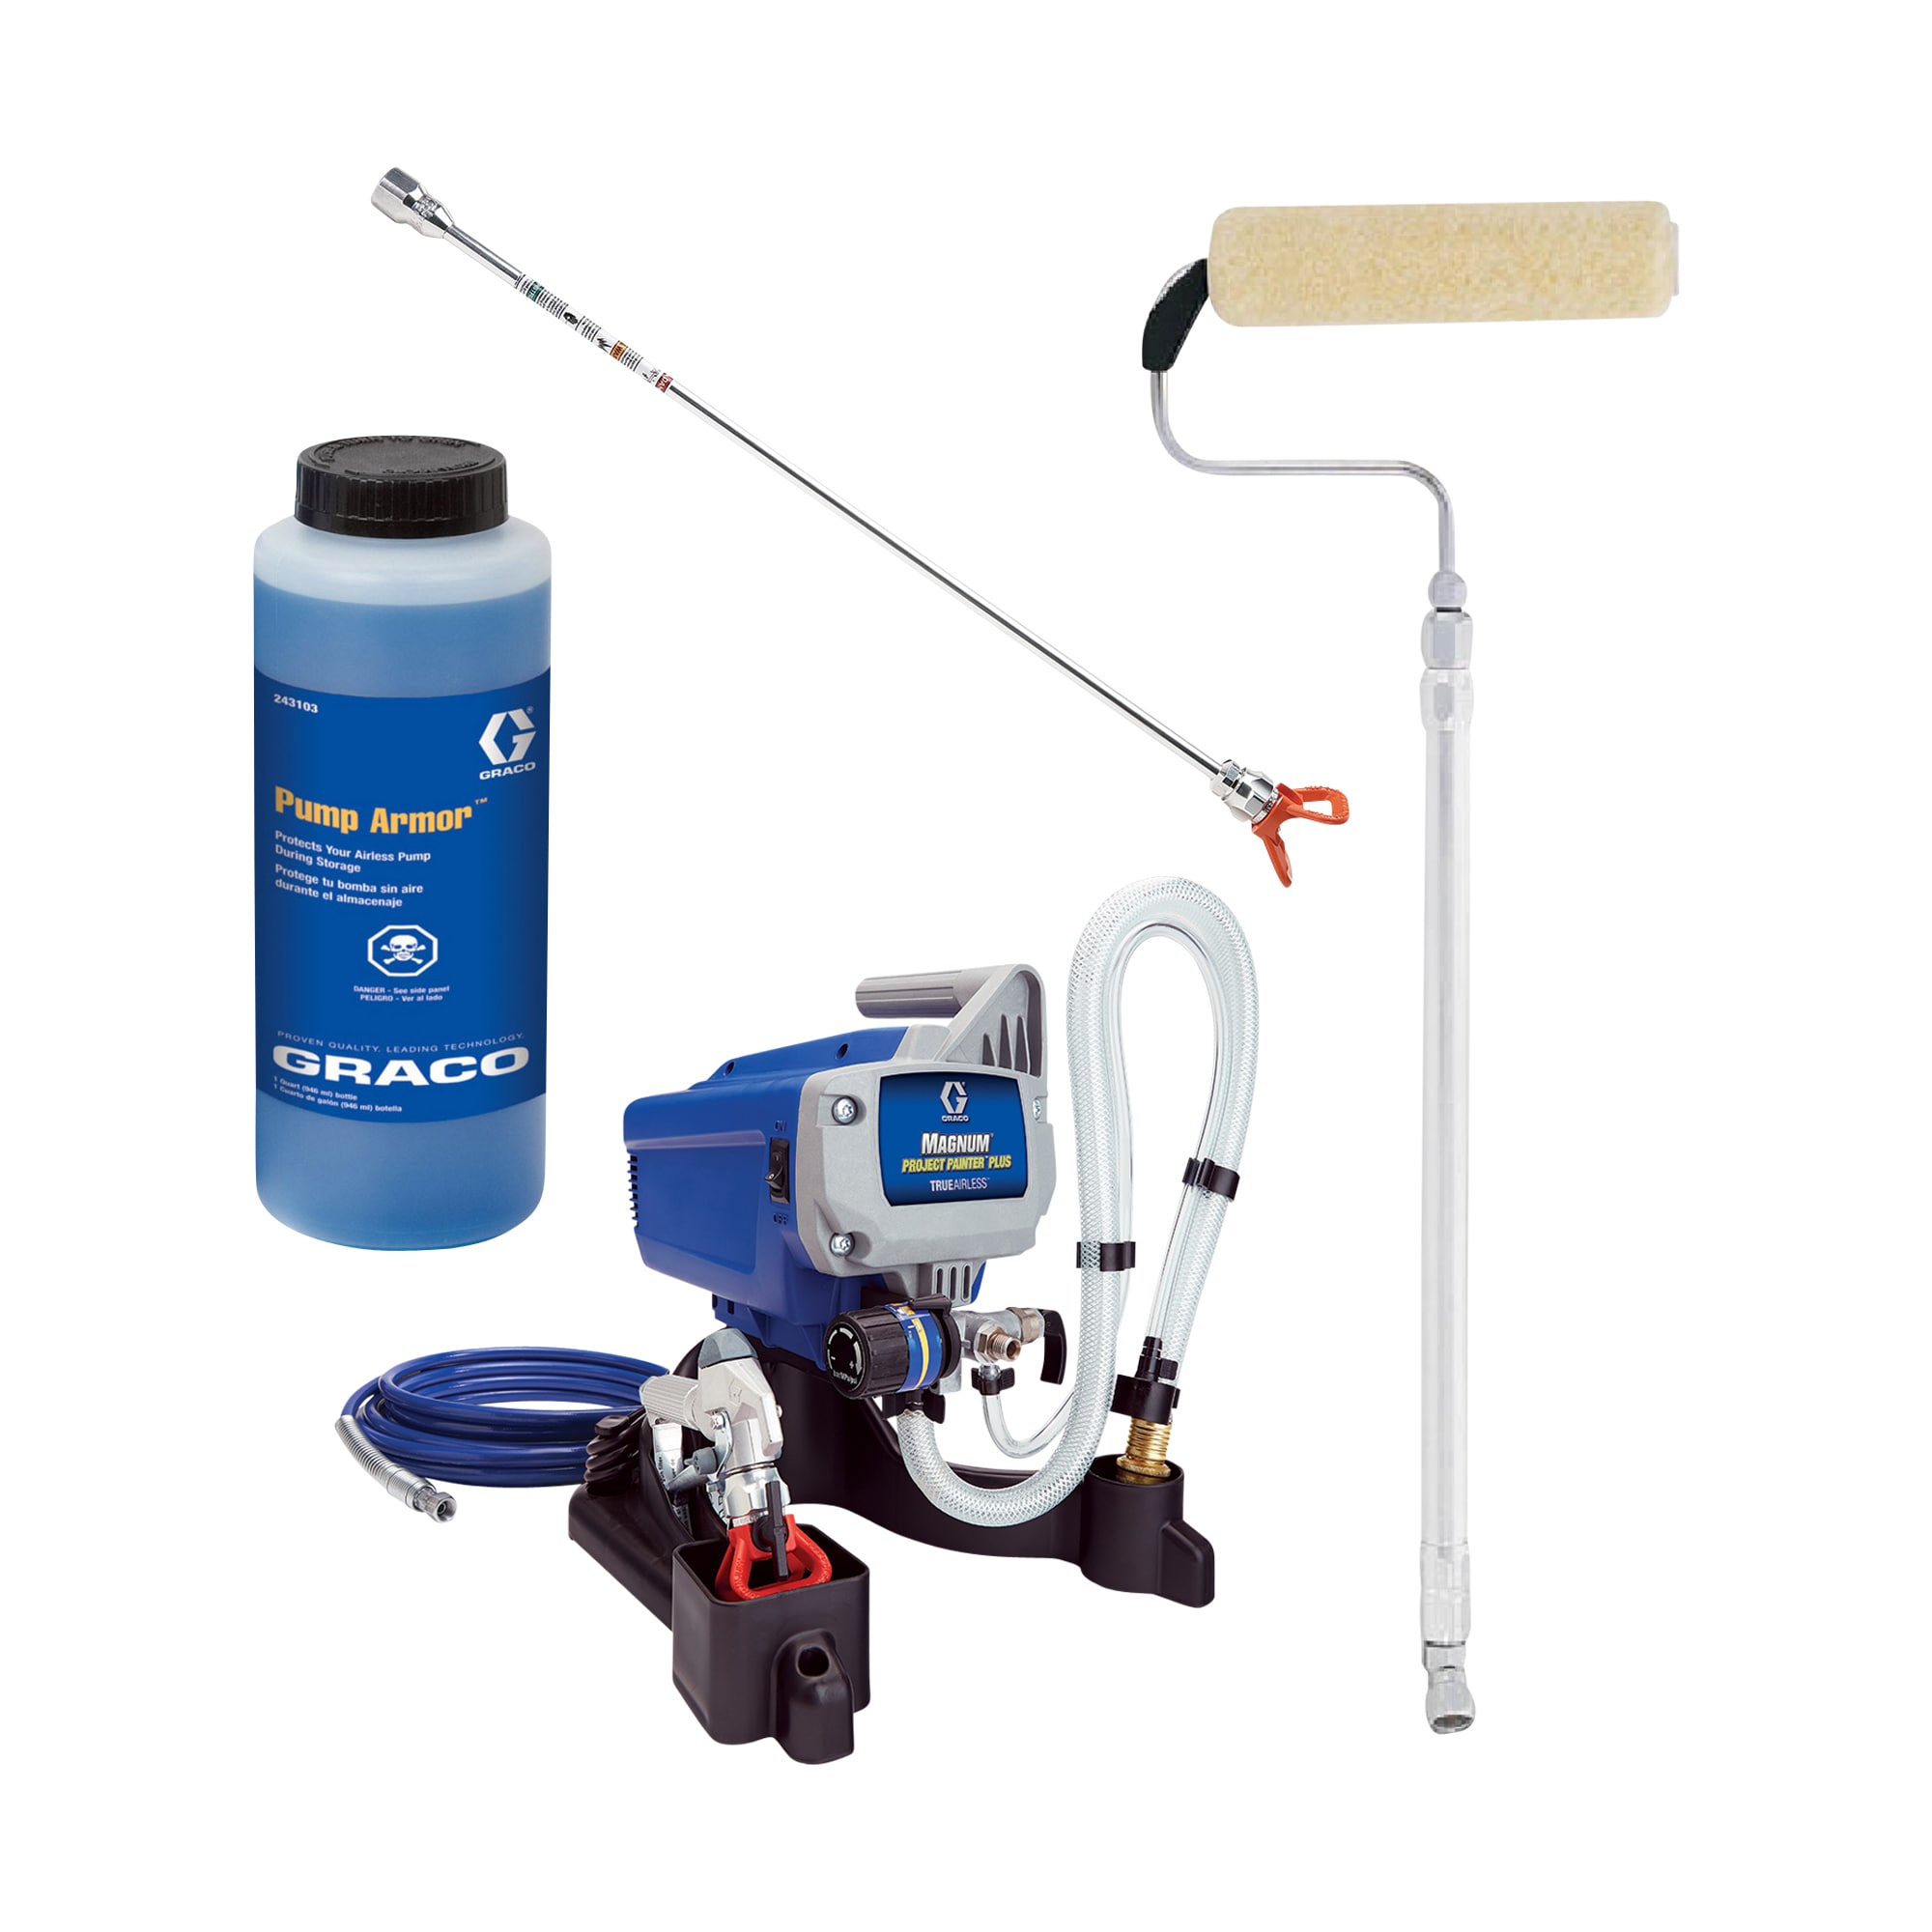 Punktlighed peber Sætte Shop Graco Project Painter Plus Airless Paint Sprayer and Accessories Kit  at Lowes.com